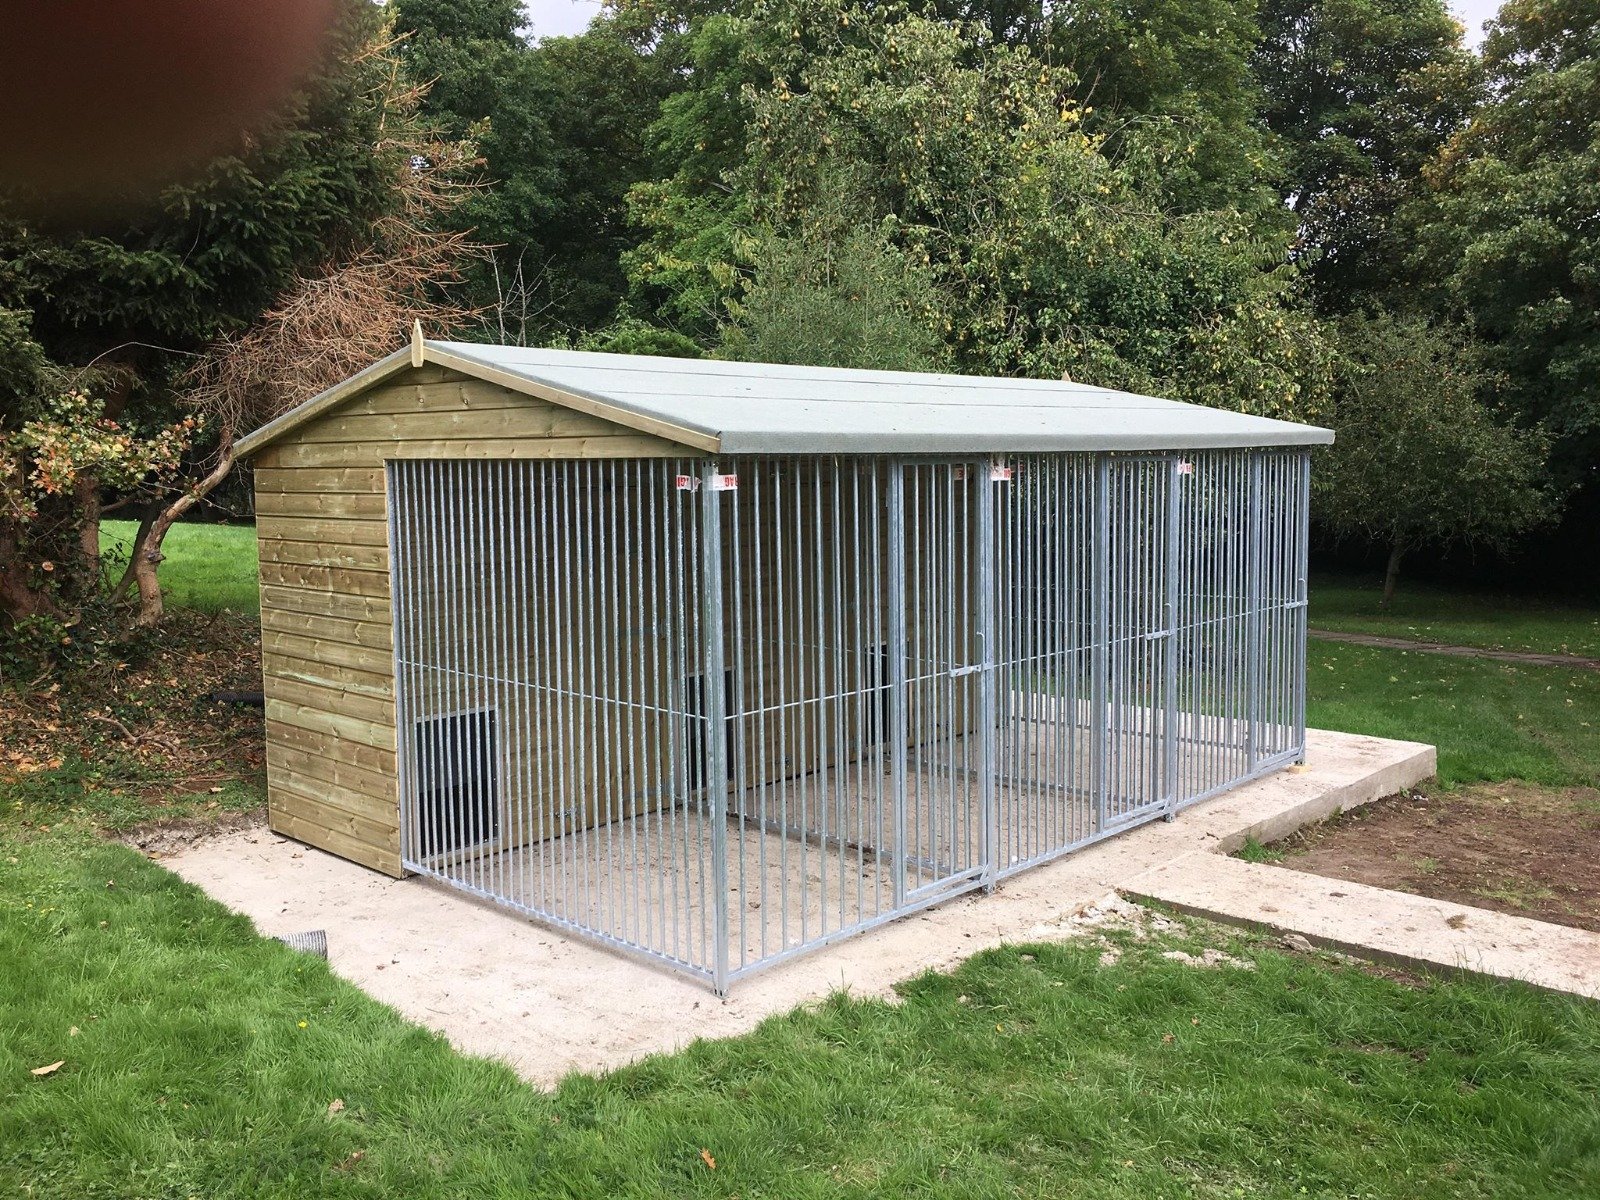 Chesterton 4 Block Wooden Dog Kennel And Run 20ft (wide) x 10'6ft (depth) x 7'3ft (apex)